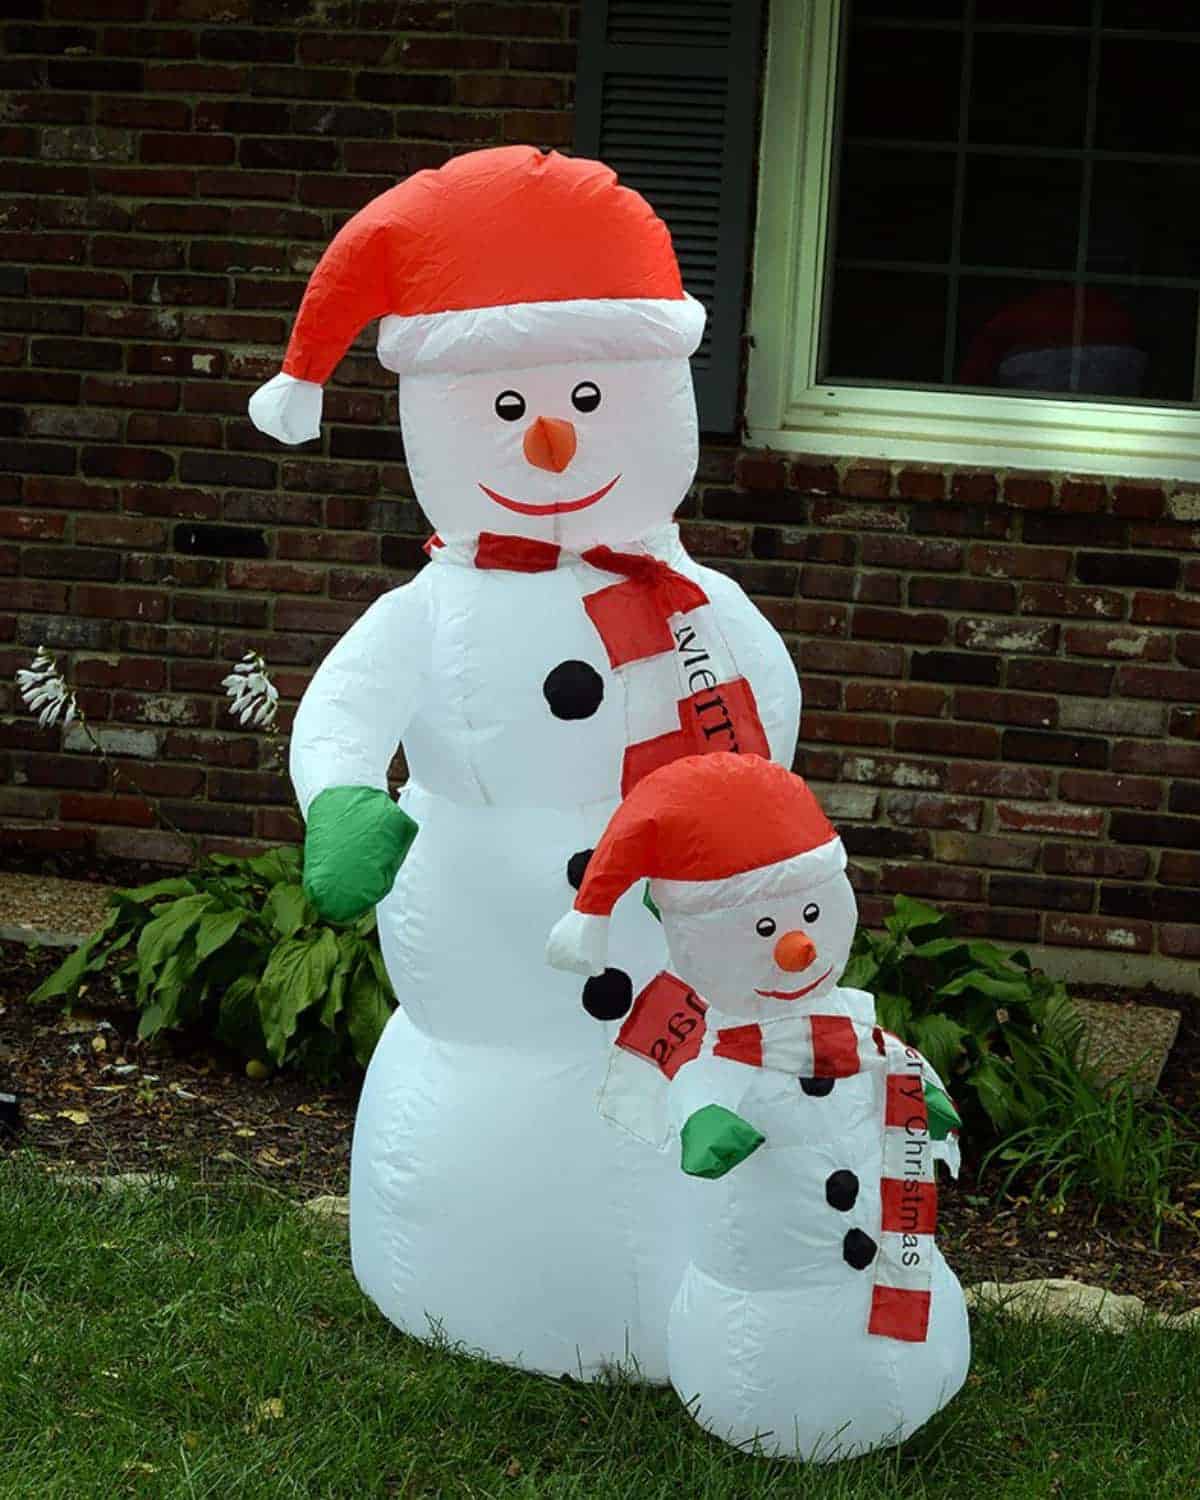 Self-Inflating Snowman Yard Inflatable | High Tech Christmas Decorations To Get Into the Festive Holiday Season